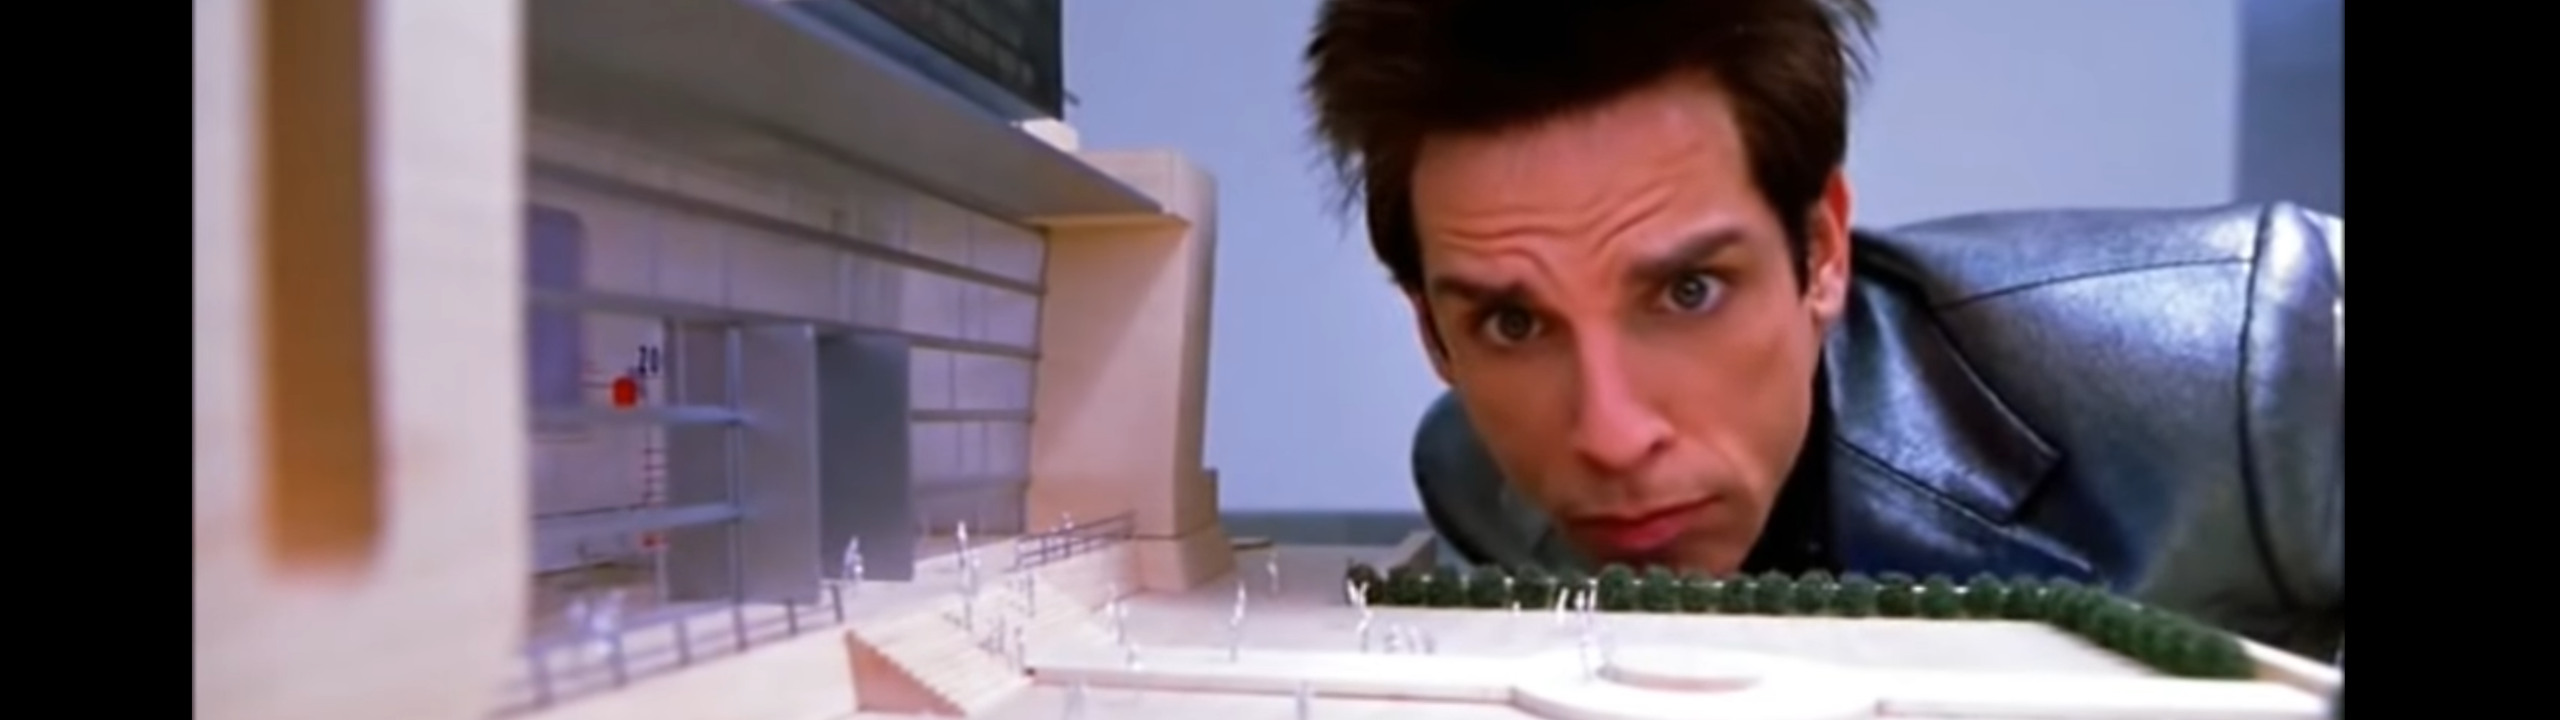 A screenshot from the movie Zoolander